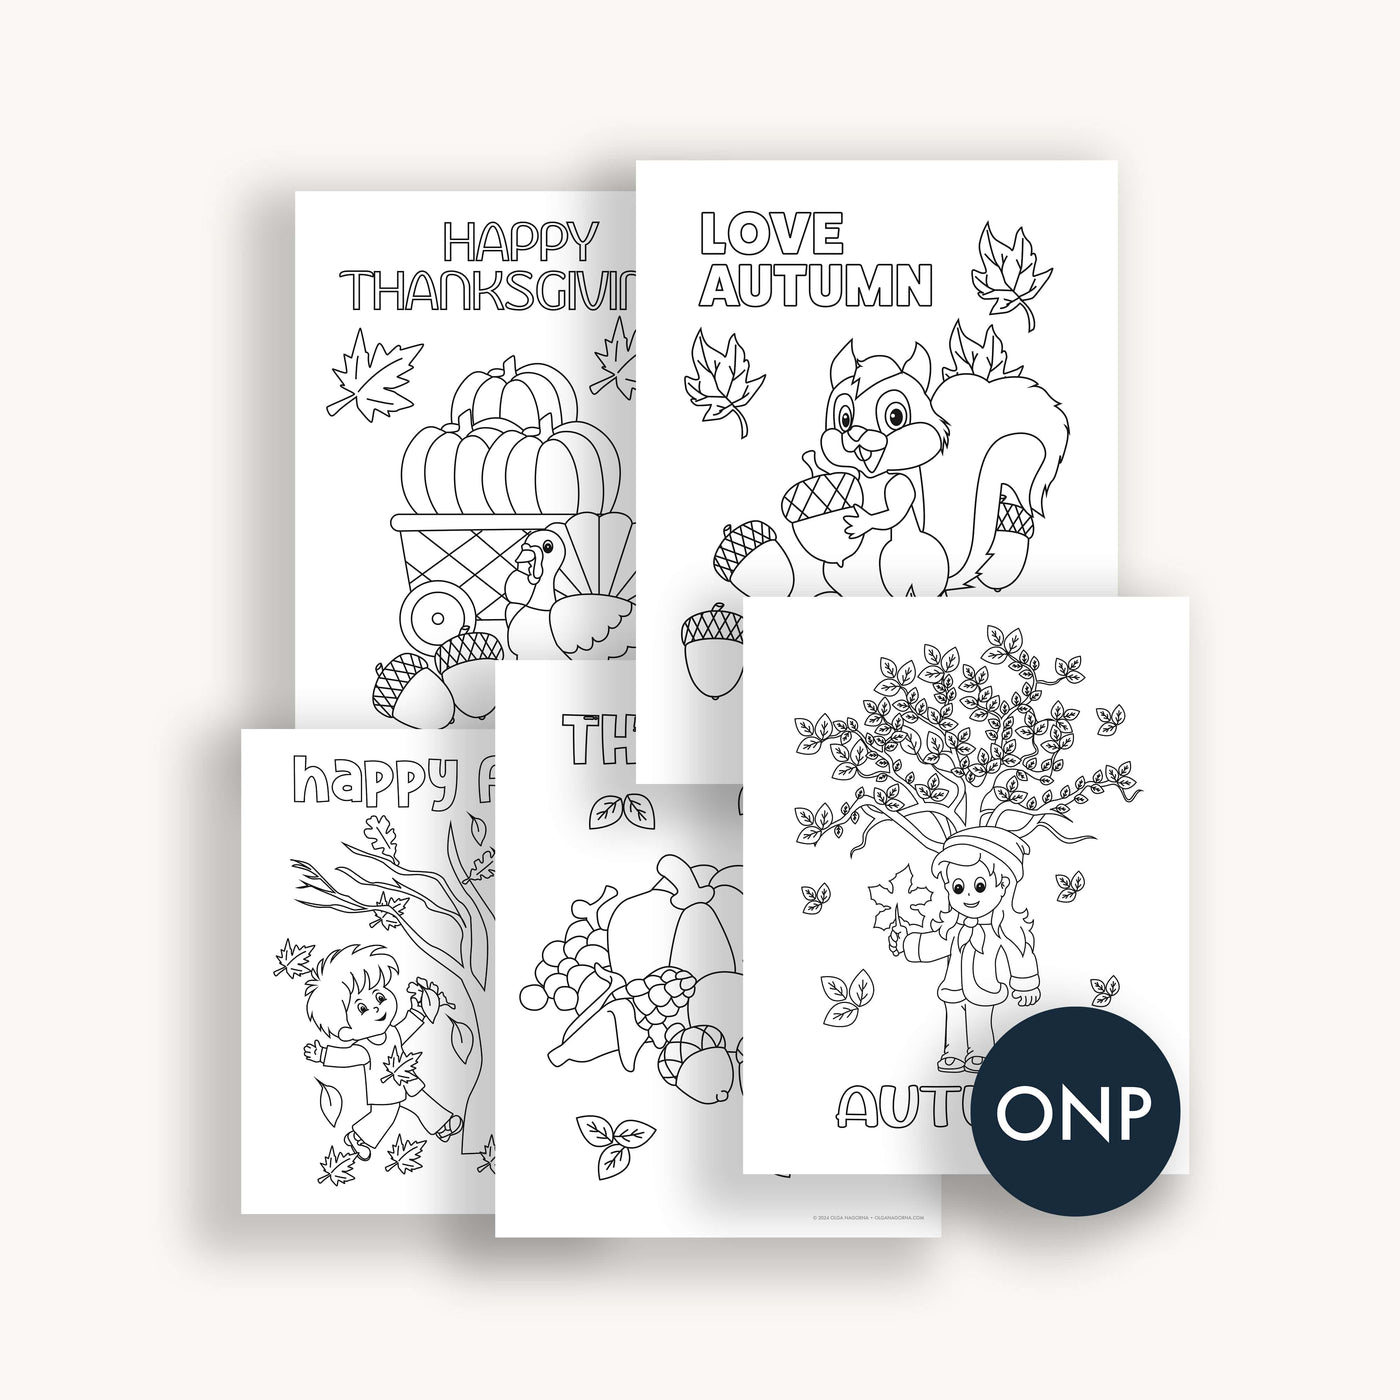 Autumn and Thanksgiving coloring pages for kids and adults by Simpliday Paper.